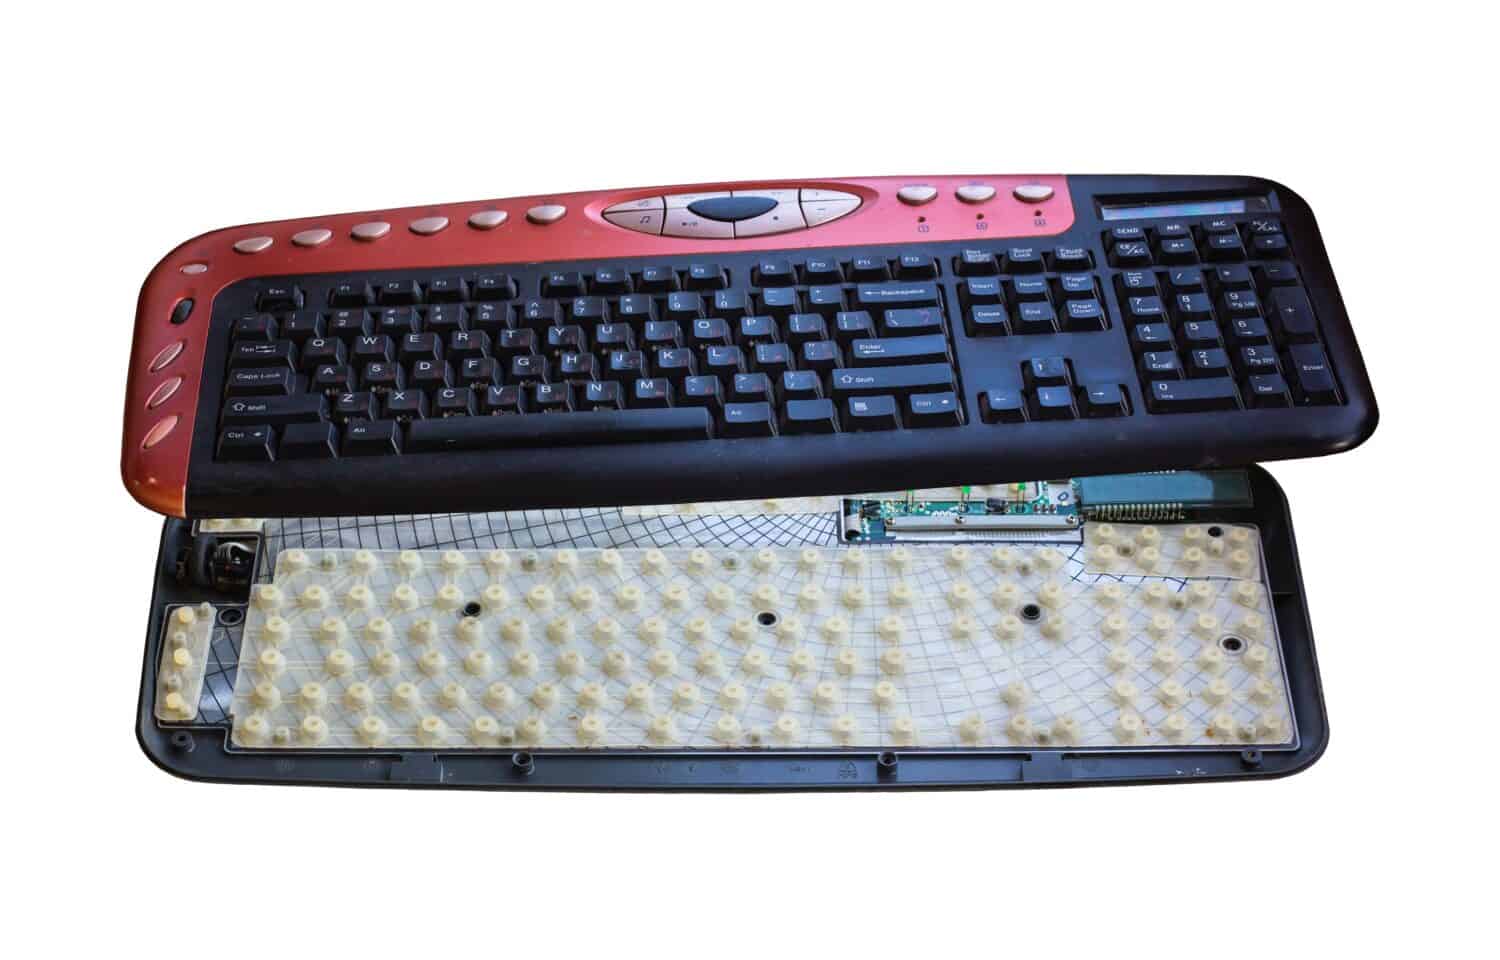 Disassembled keyboard isolated on white background. Membrane plate at the bottom and keyboard housing at the top